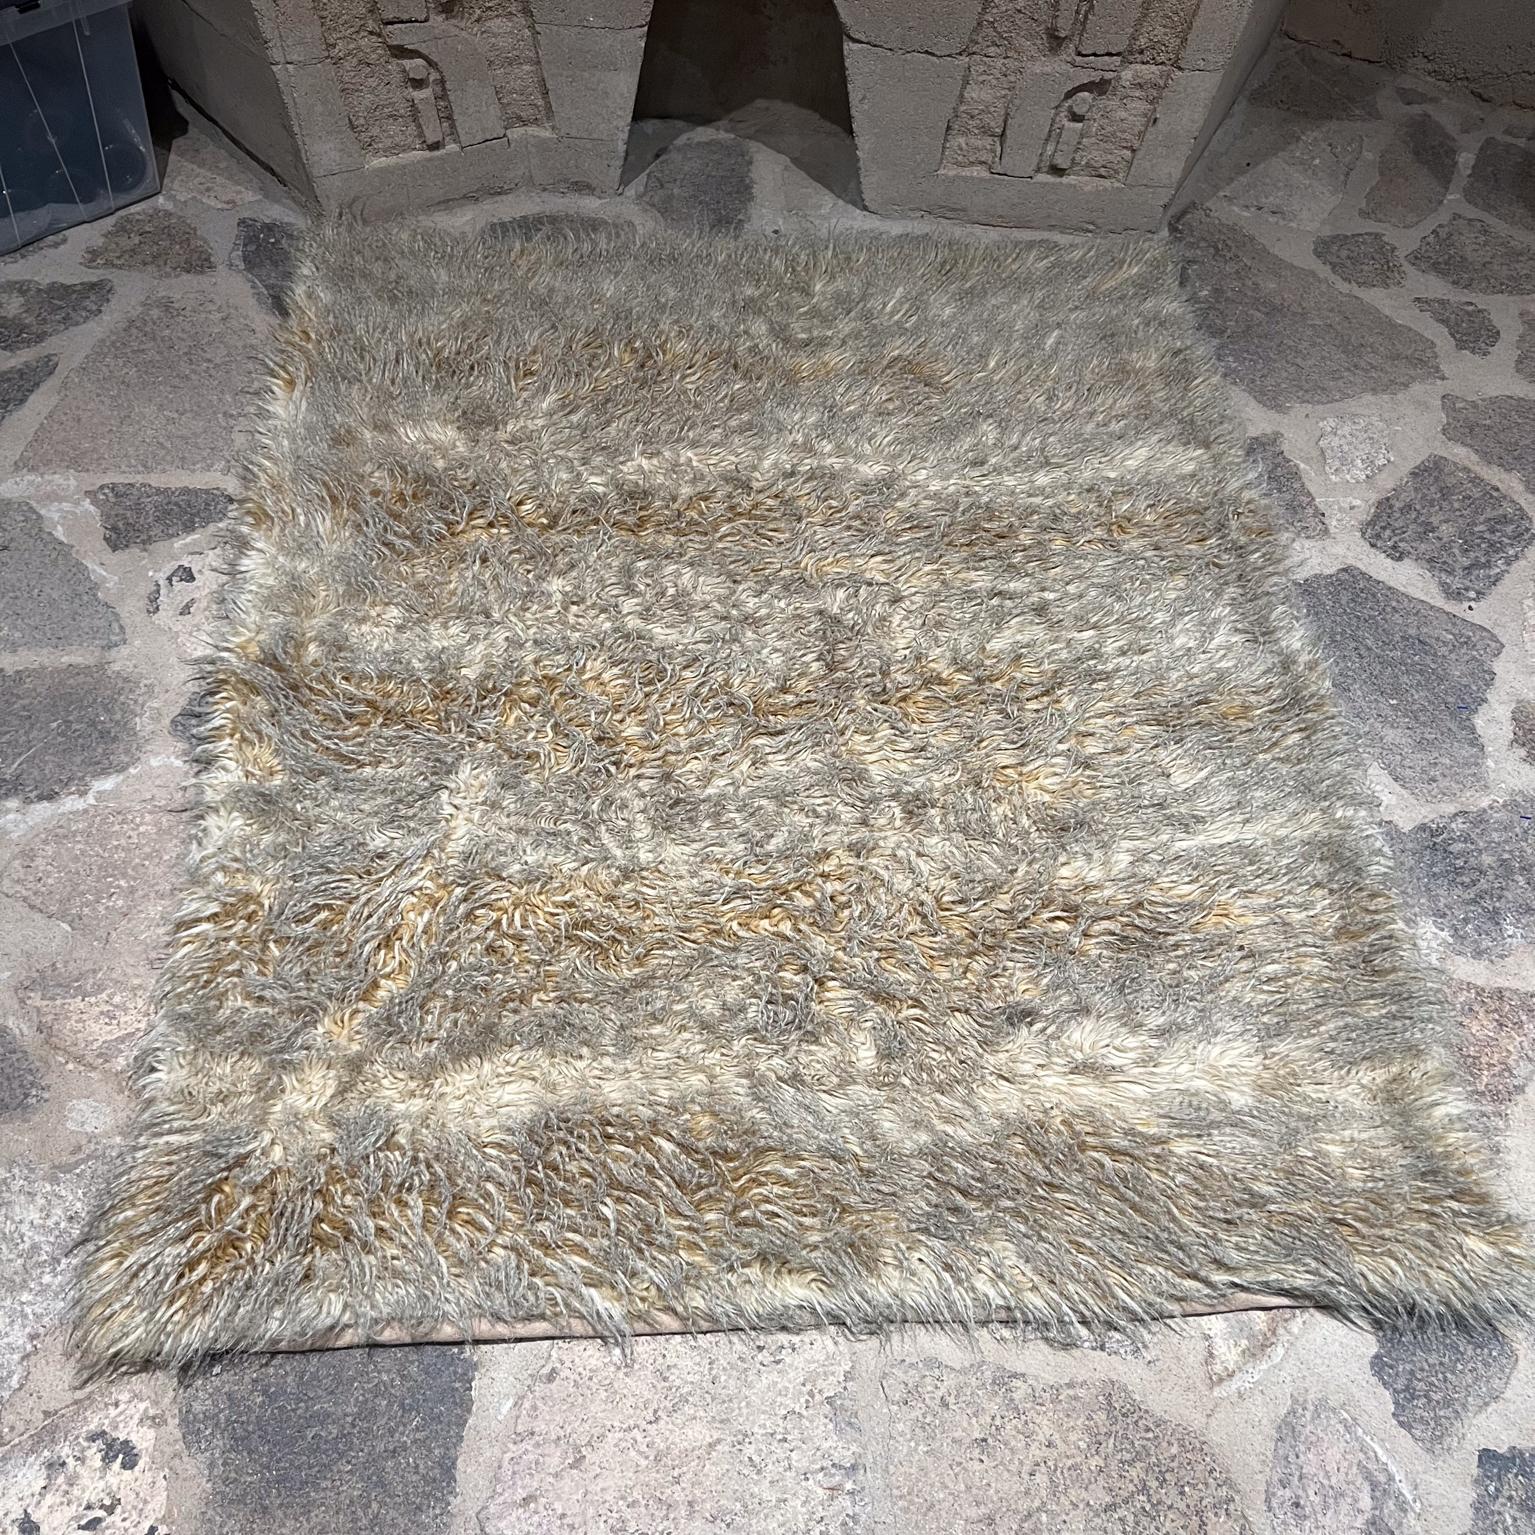 Vintage Faux fur Rug Nicole Miller Home
49 x 59
Unrestored preowned original vintage condition
Refer to images provided.